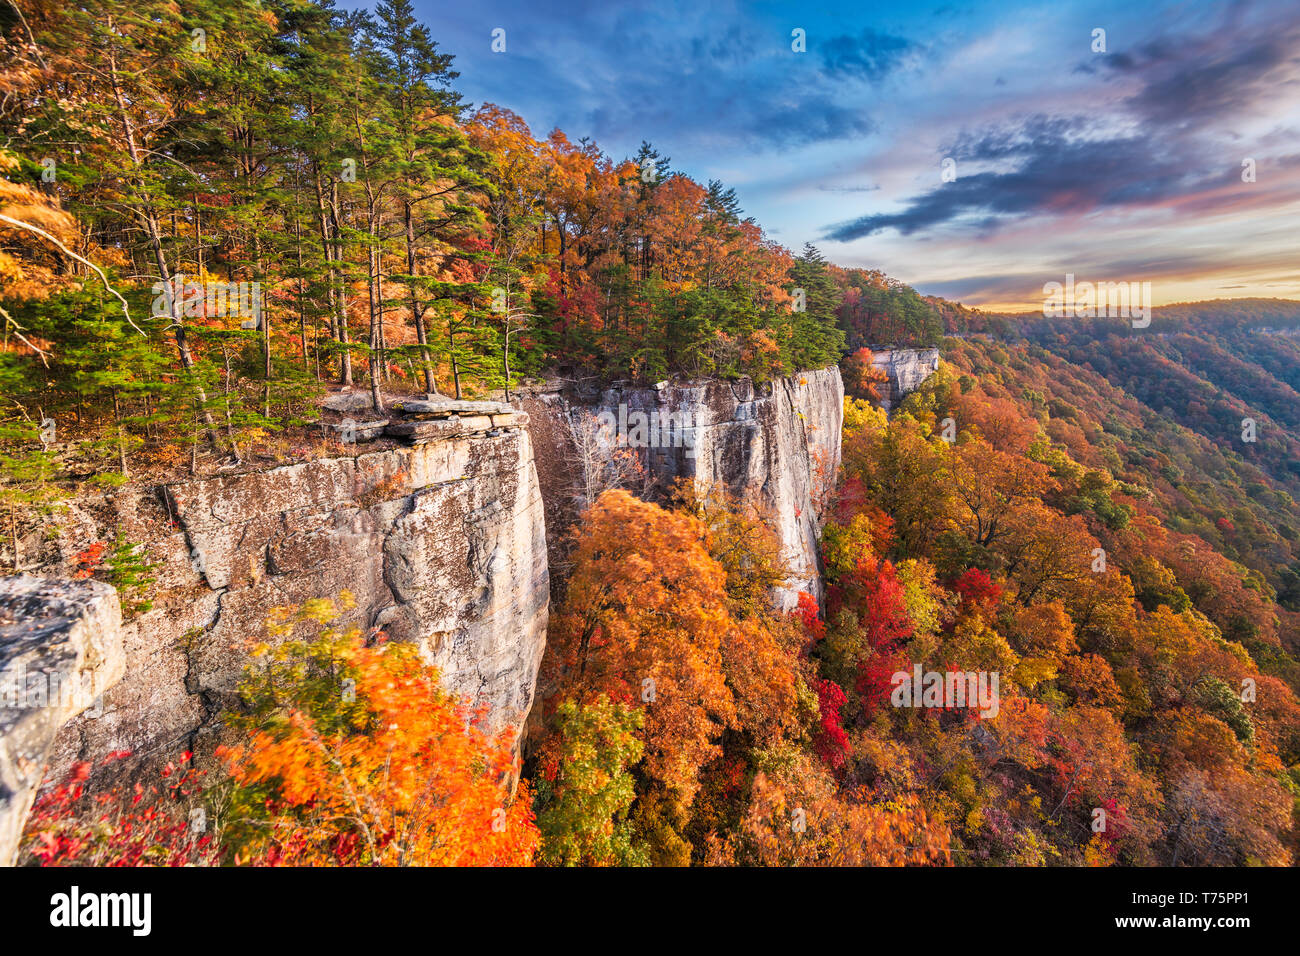 New River Gorge, West Virgnia, USA autumn morning lanscape at the Endless Wall. Stock Photo